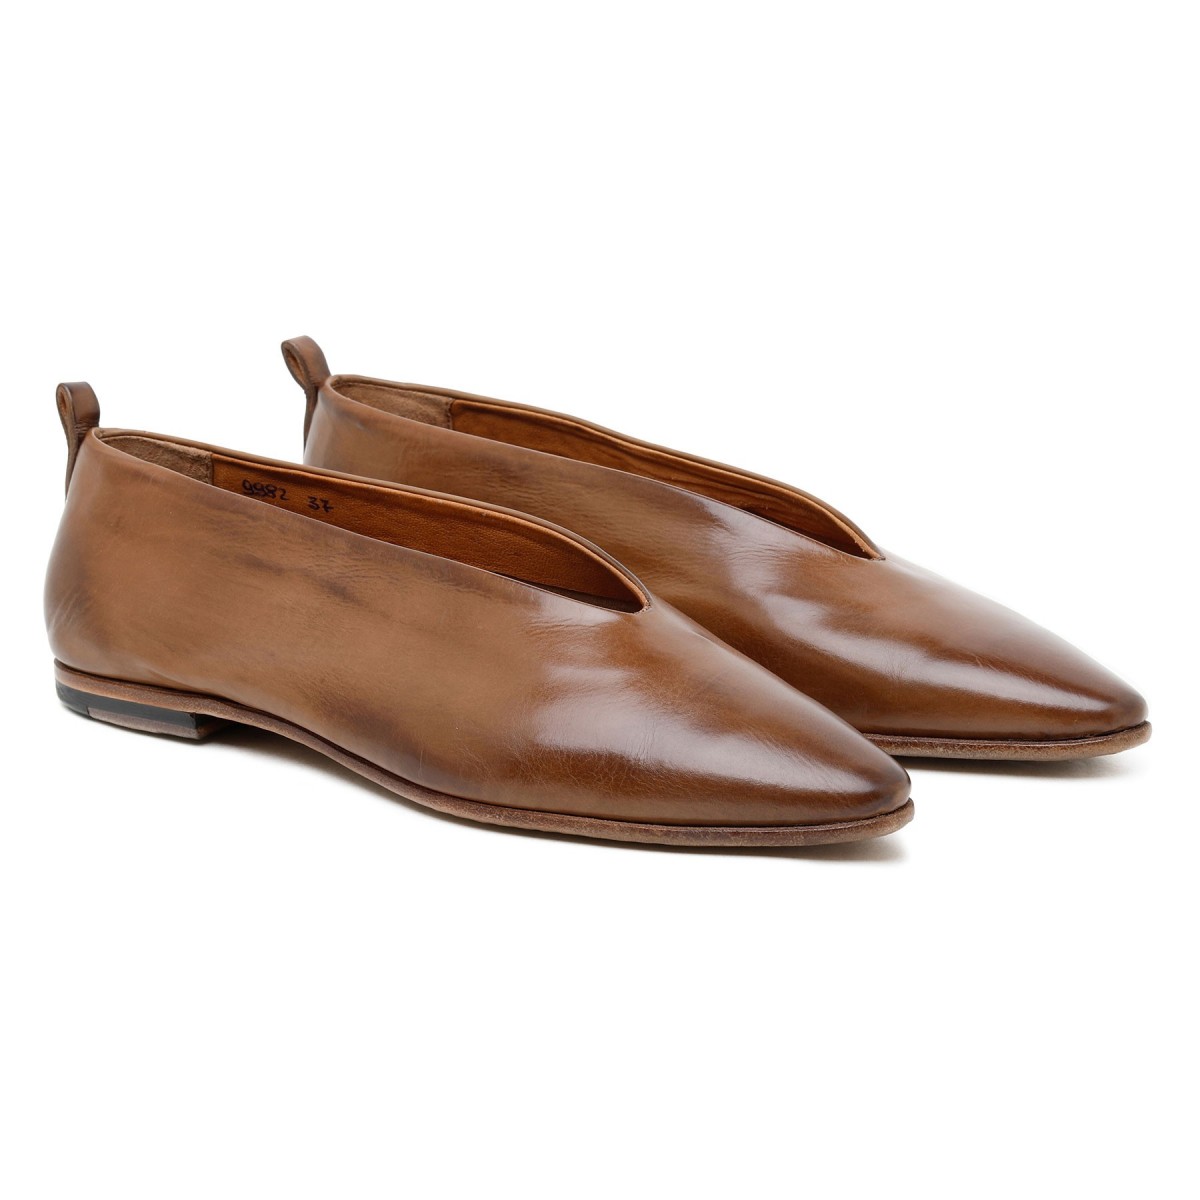 Brown calf leather slippers